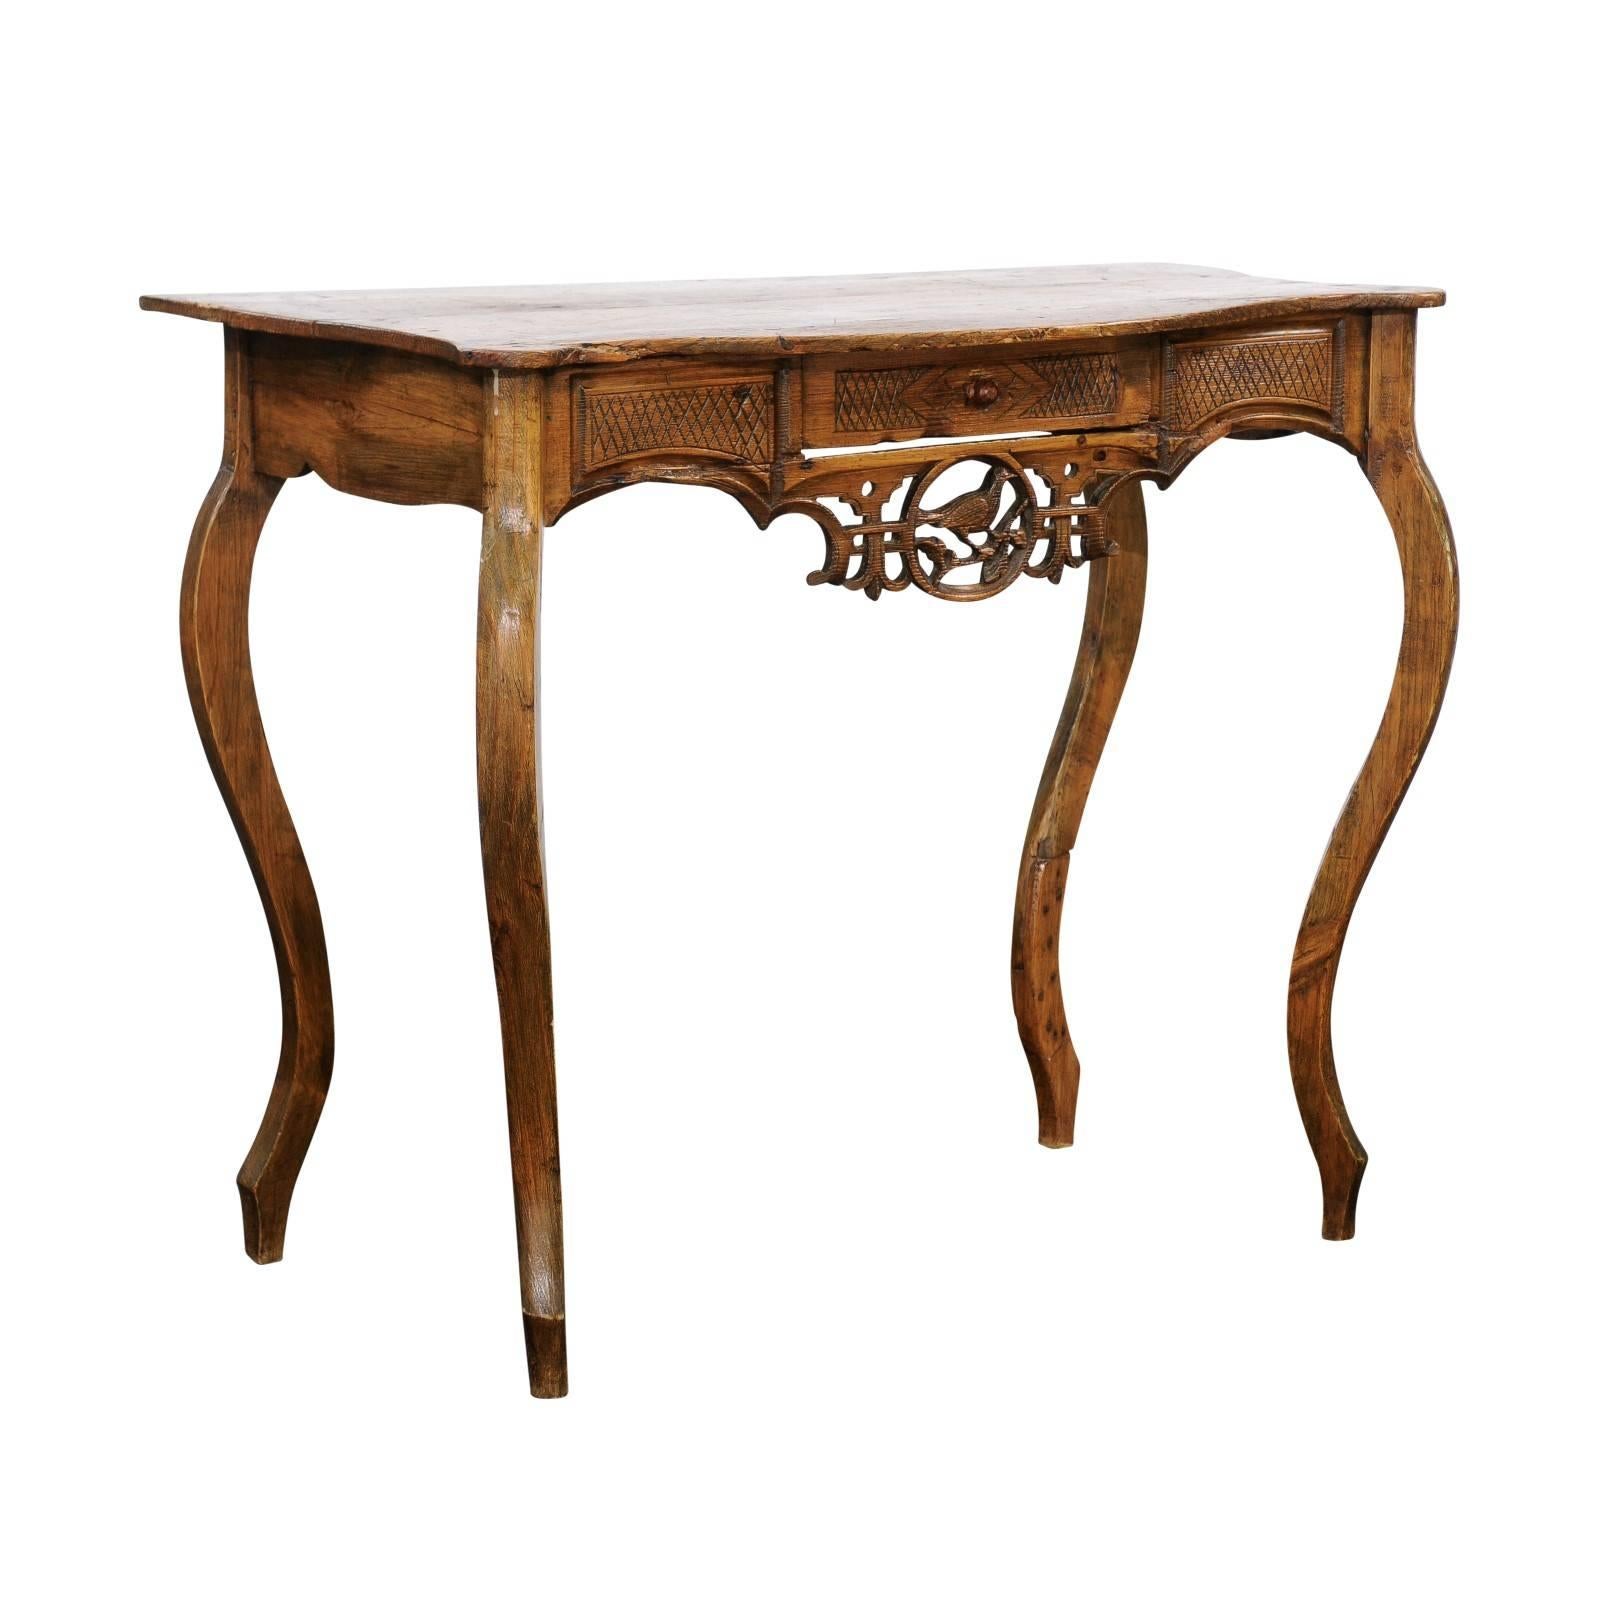 French 18th Century Louis XV Carved Pine Single Drawer Desk from the Jura Region